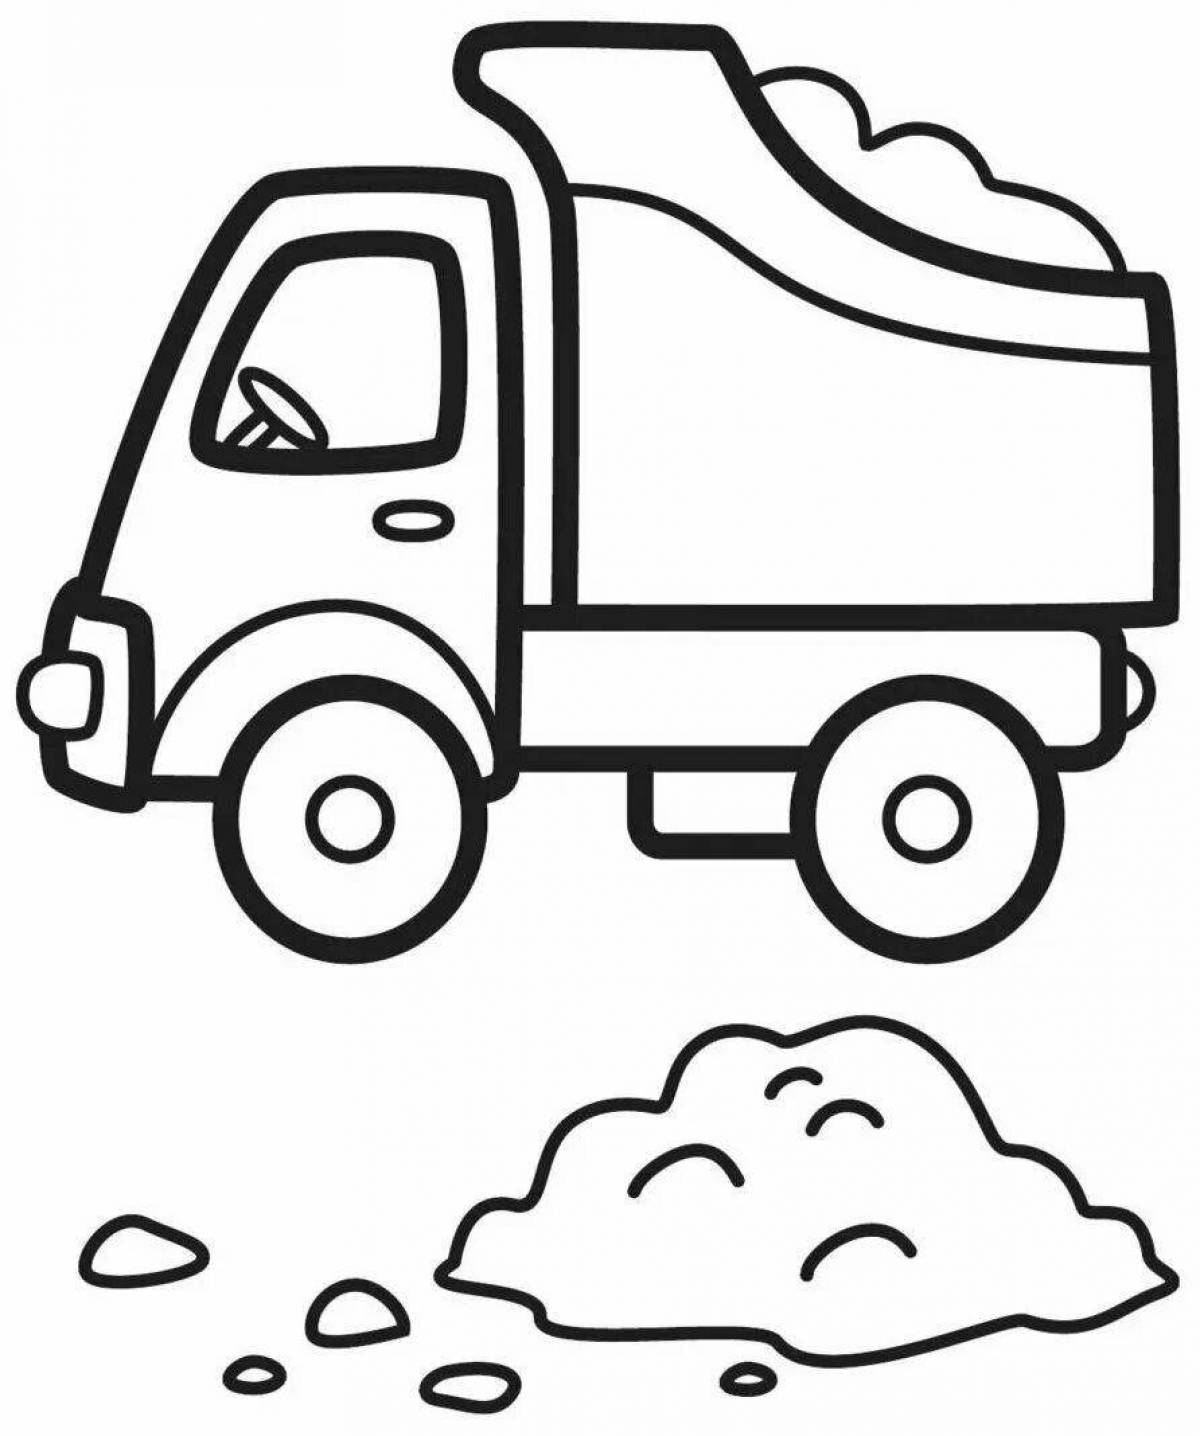 Coloring for a bright truck for kids